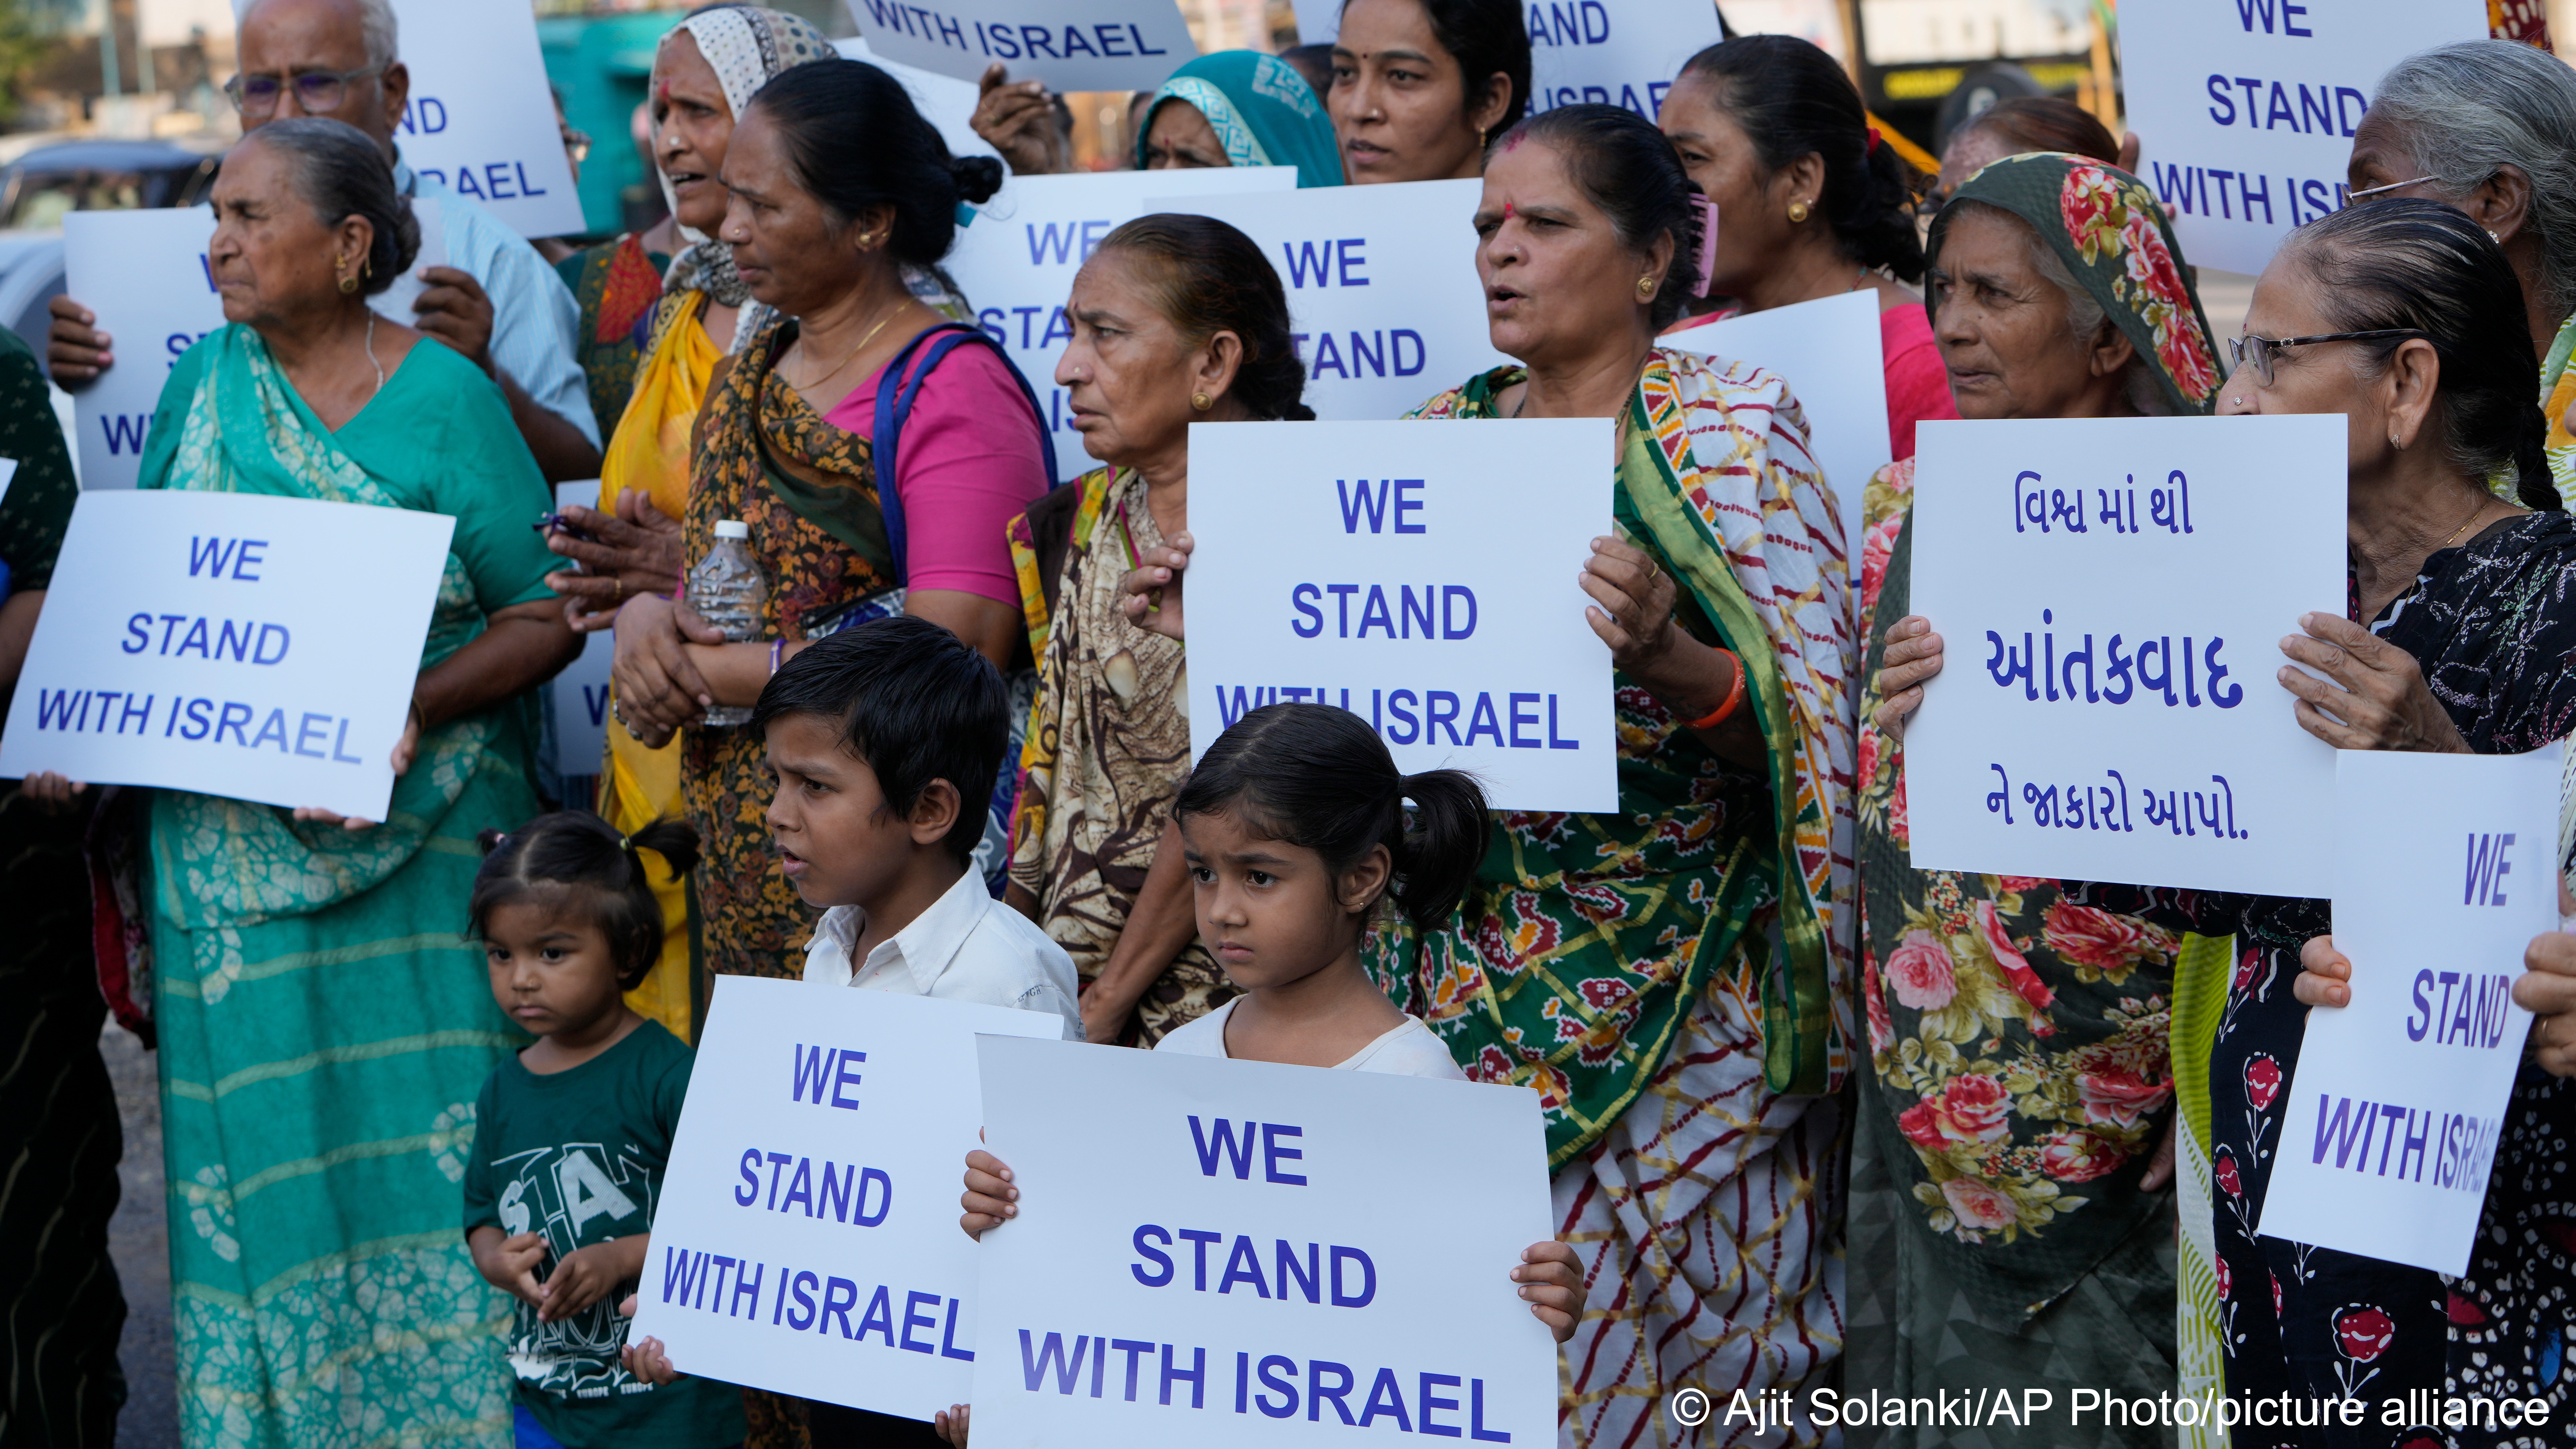 People in Ahmedabad hold placards bearing the message "We stand with Israel"